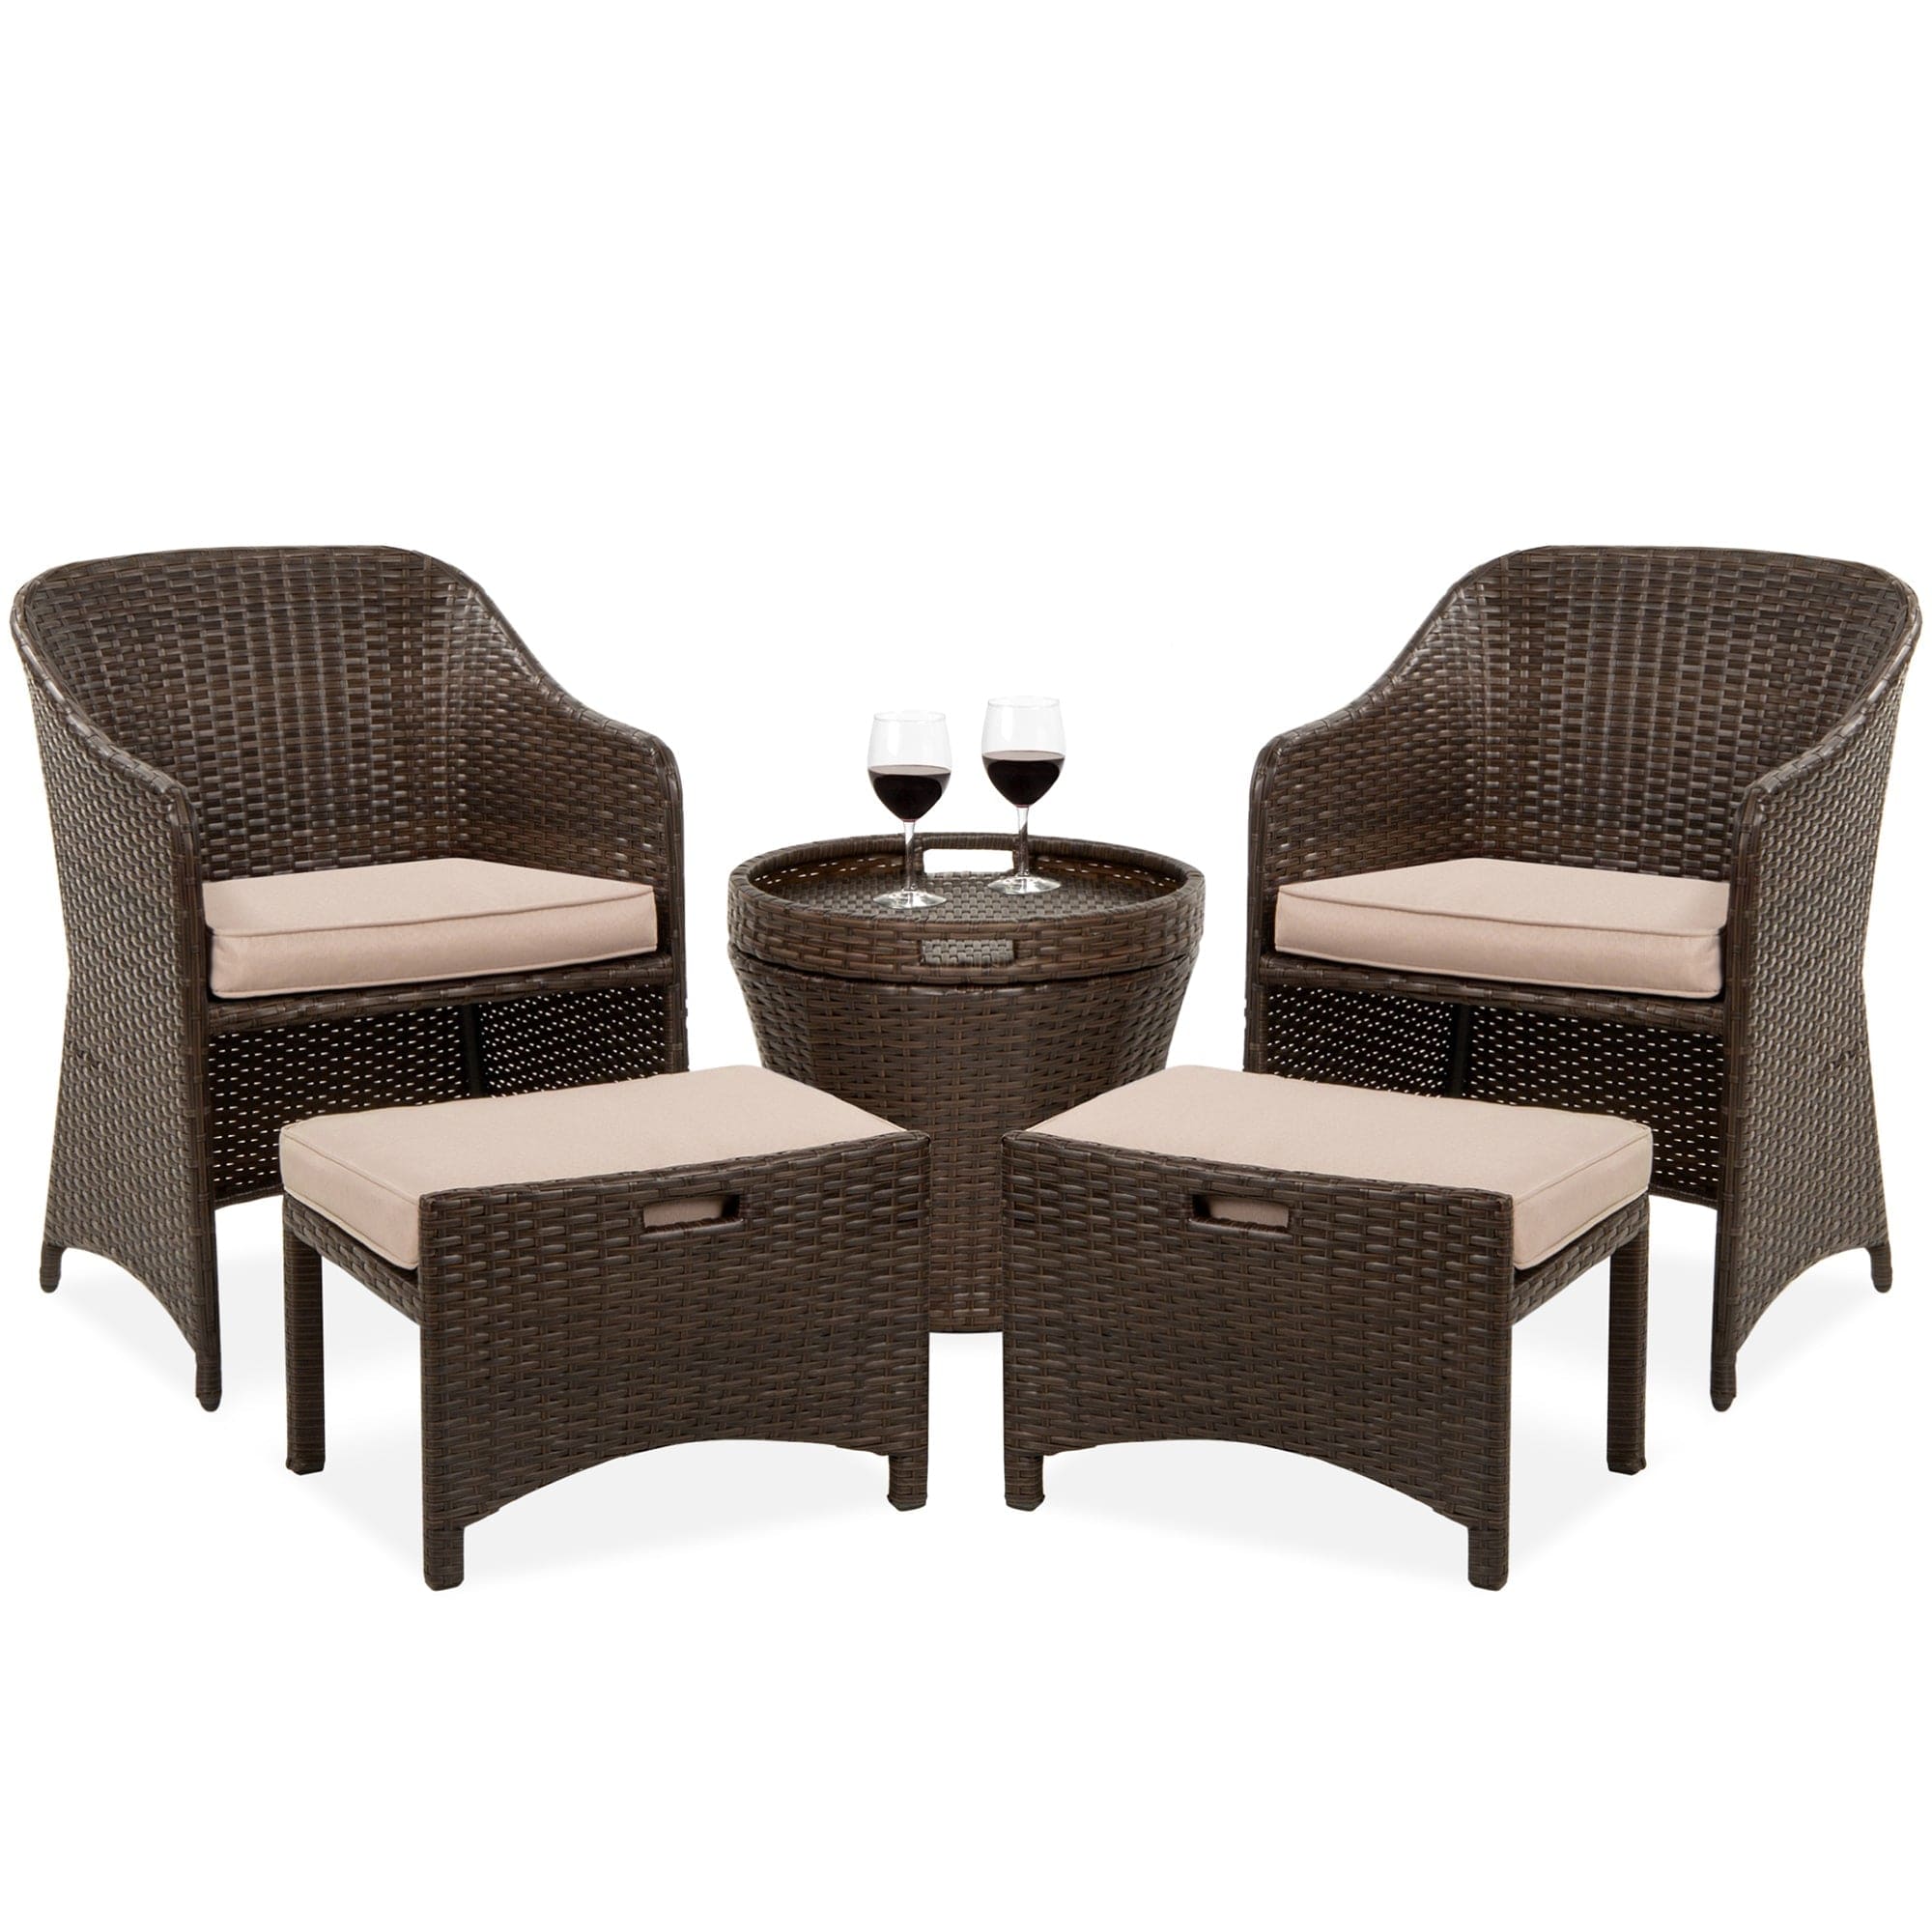 Dreamline Outdoor Garden/Balcony Patio Seating Set 1+2, 2 Chairs 2 Ottoman And Table (Dark Brown)